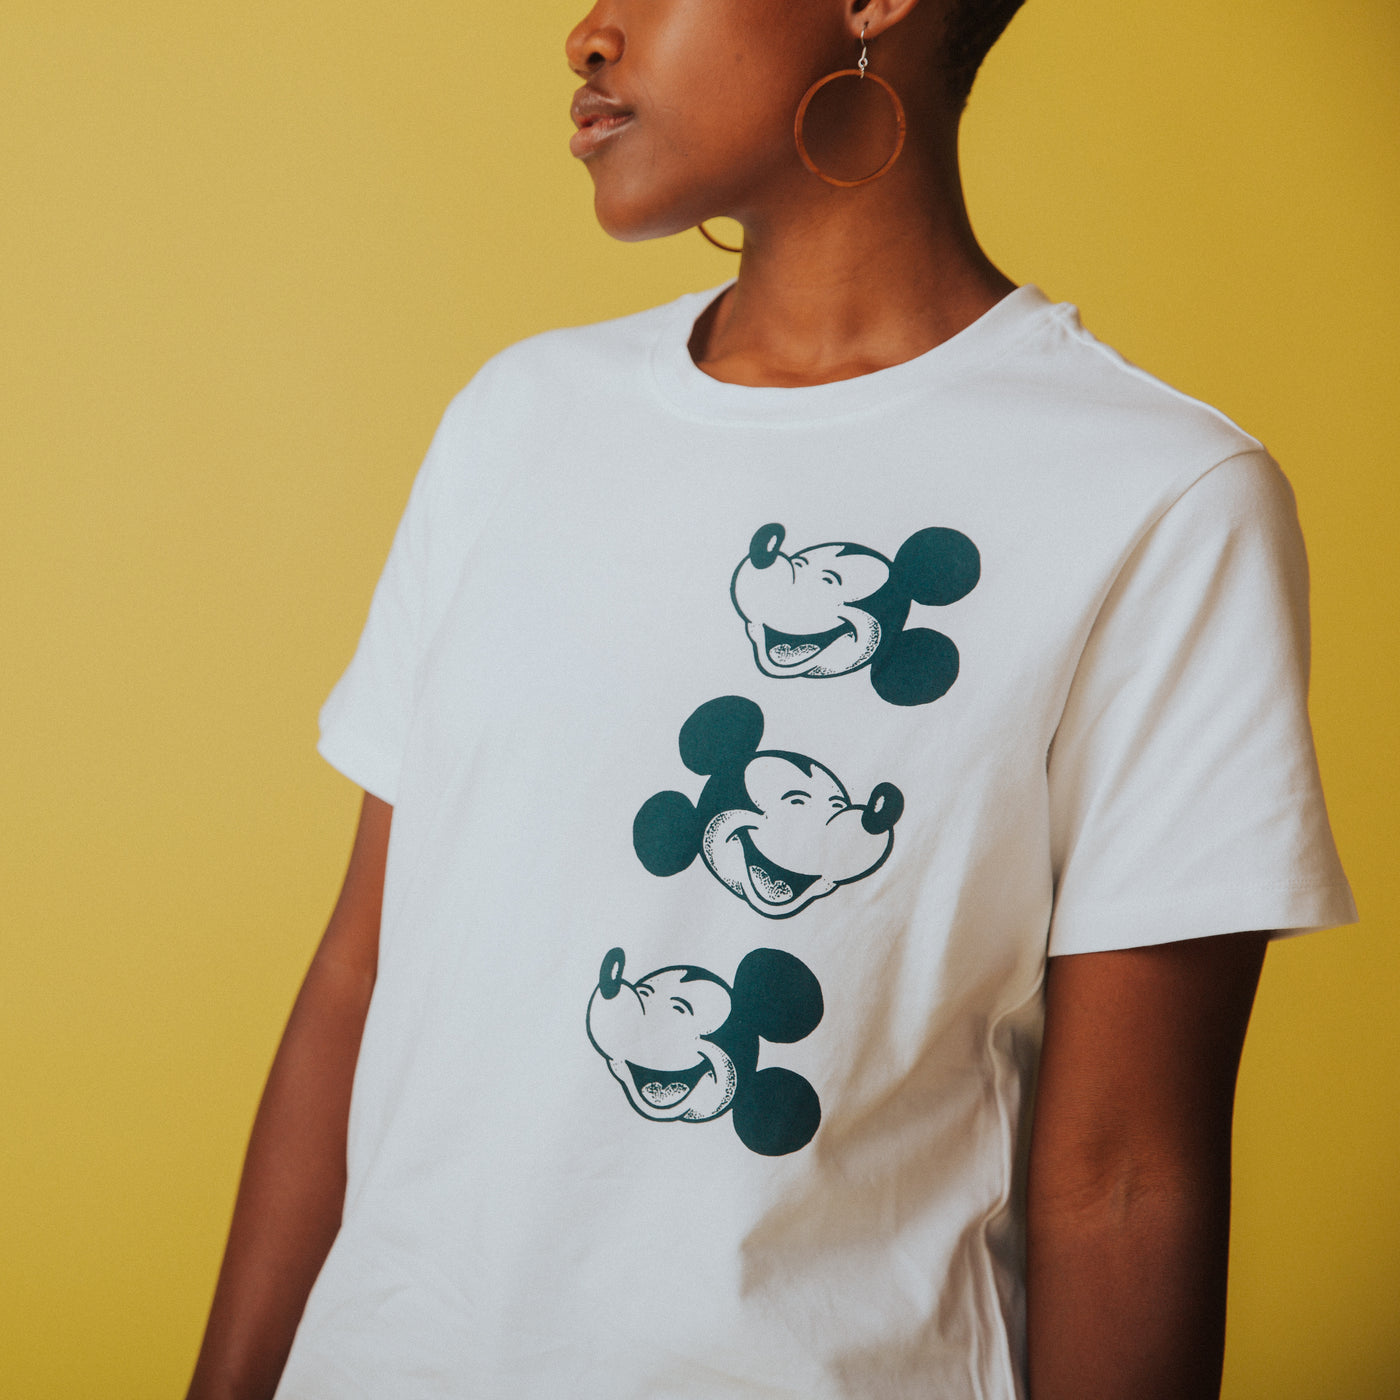 Adult Unisex Tee - 'Mickey Mouse (FINAL SALE)' - Disney Collection from RAGS